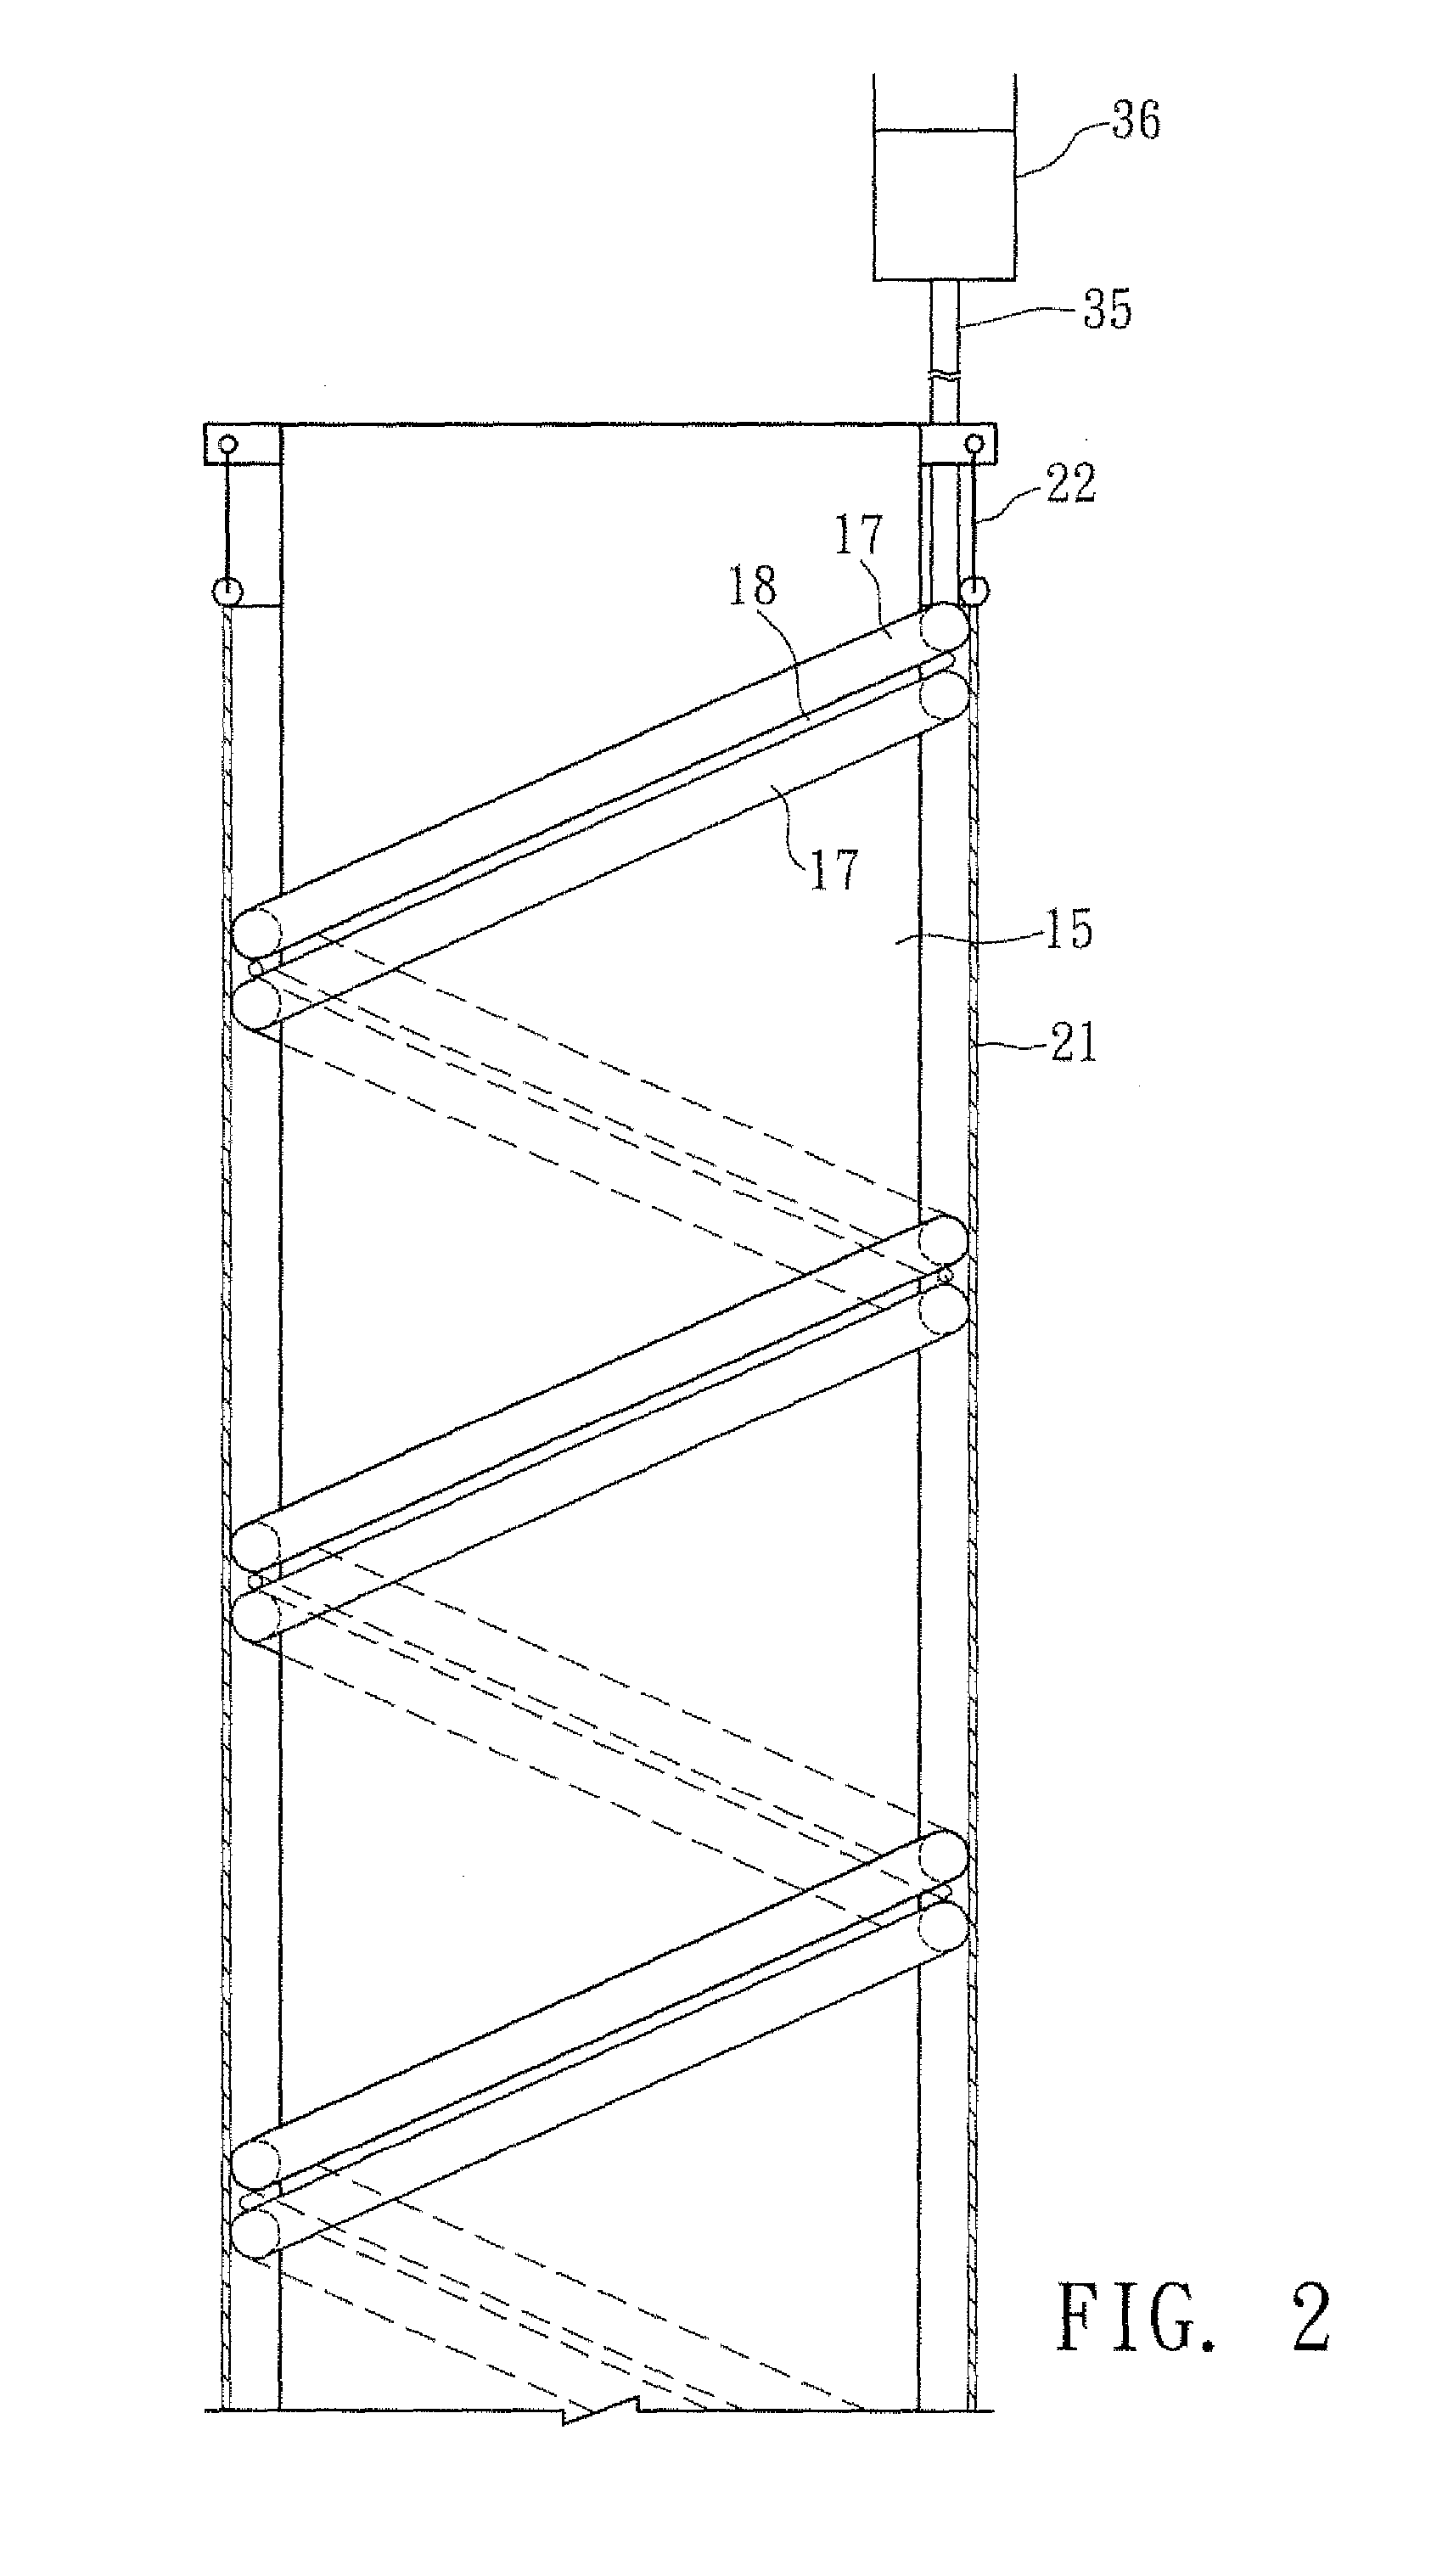 Wave elimination system for ocean thermal energy conversion assembly